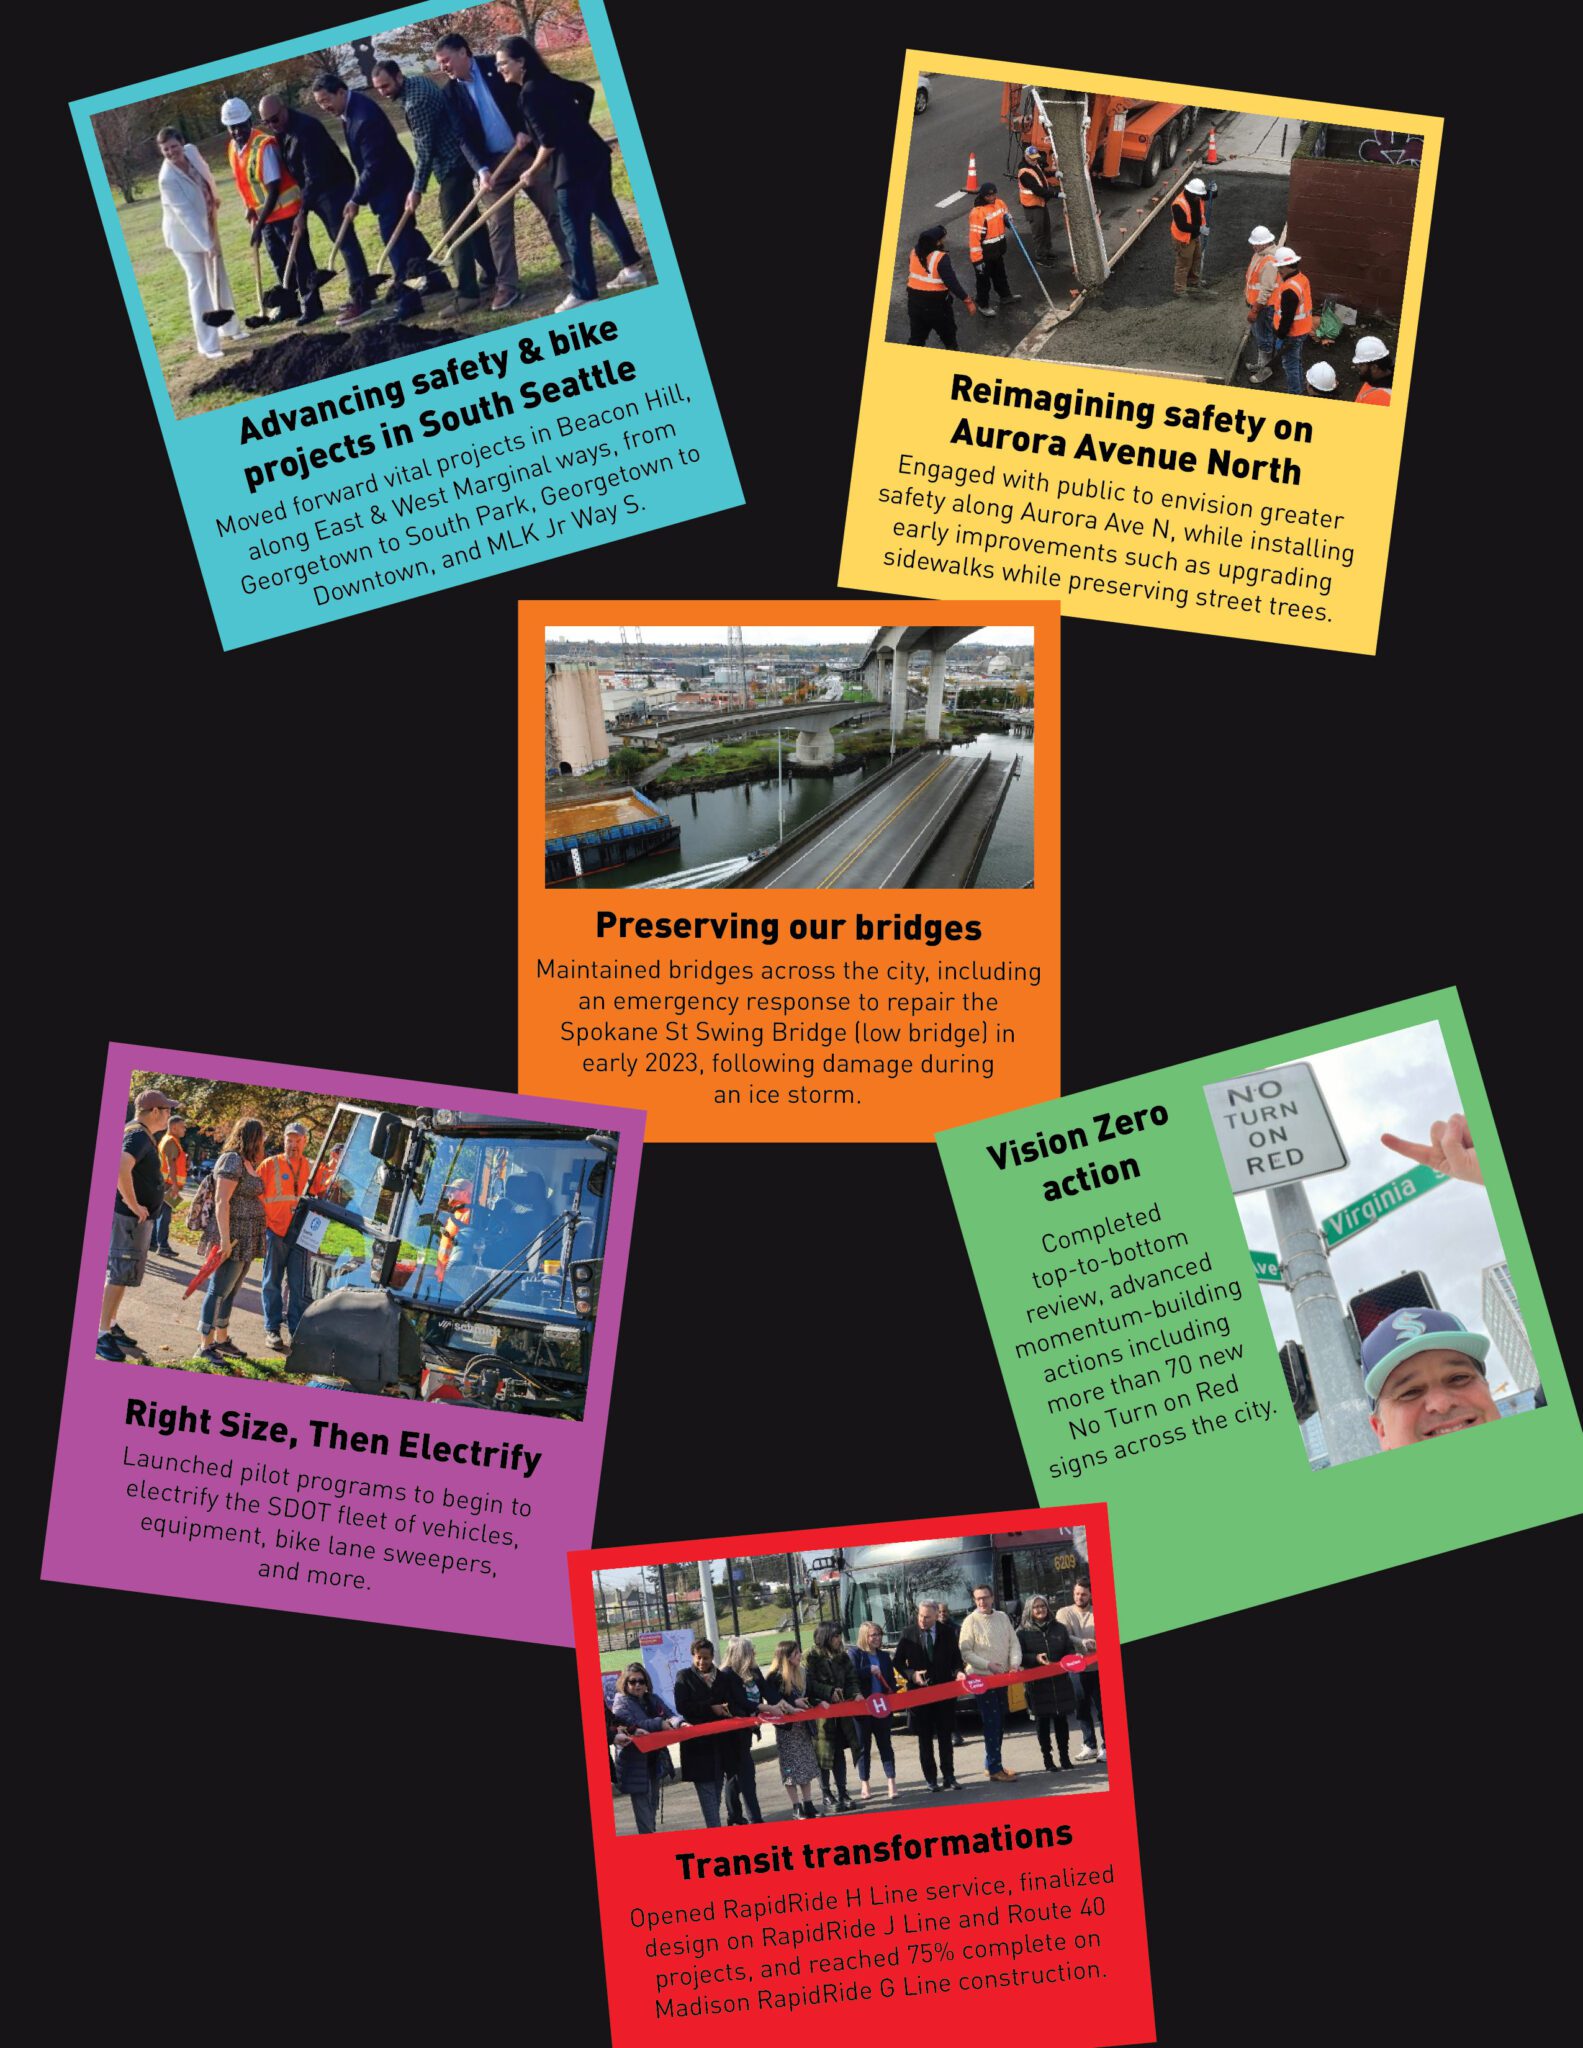 Several colorful highlights on a black background, including advancing safety and bike projects in South Seattle, Reimagining safety on Aurora Avenue North, Preserving out bridges, Vision Zero action, Right Size, Then Electrify, and Transit transformations.